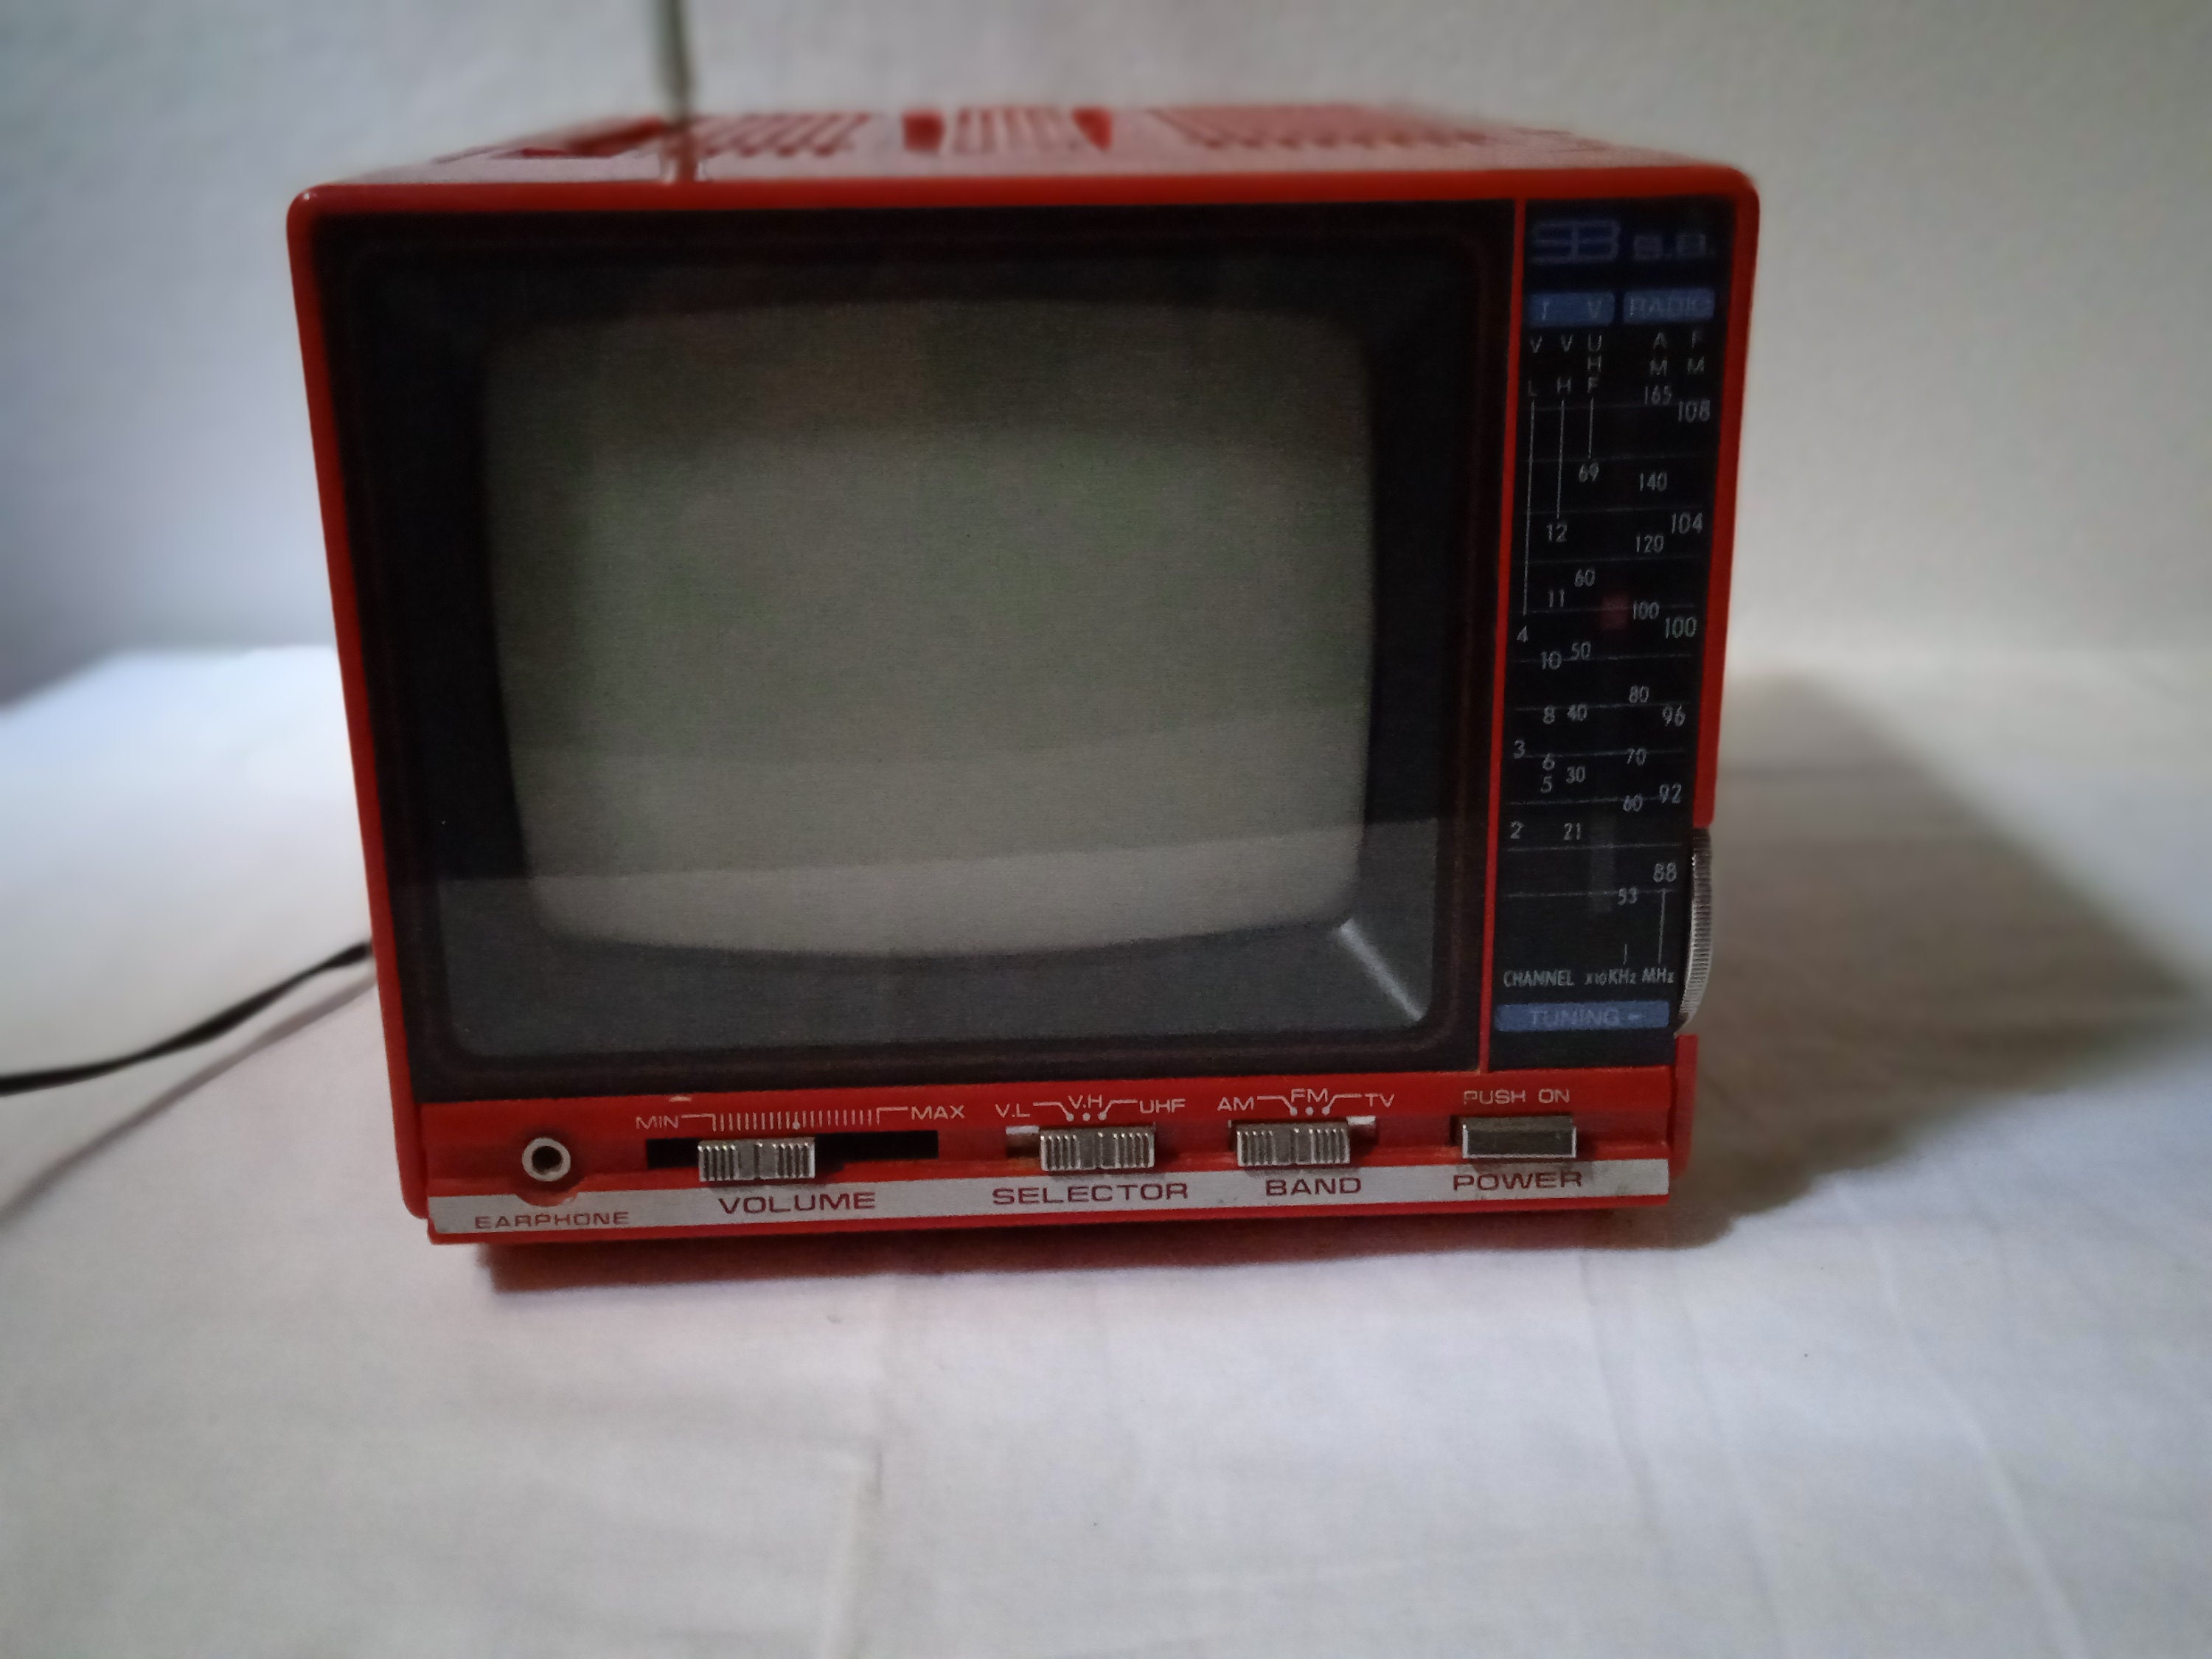 Mini TV, Radio and Television, Vintage Red Color With Two AM/FM Bands for  Decorations, 